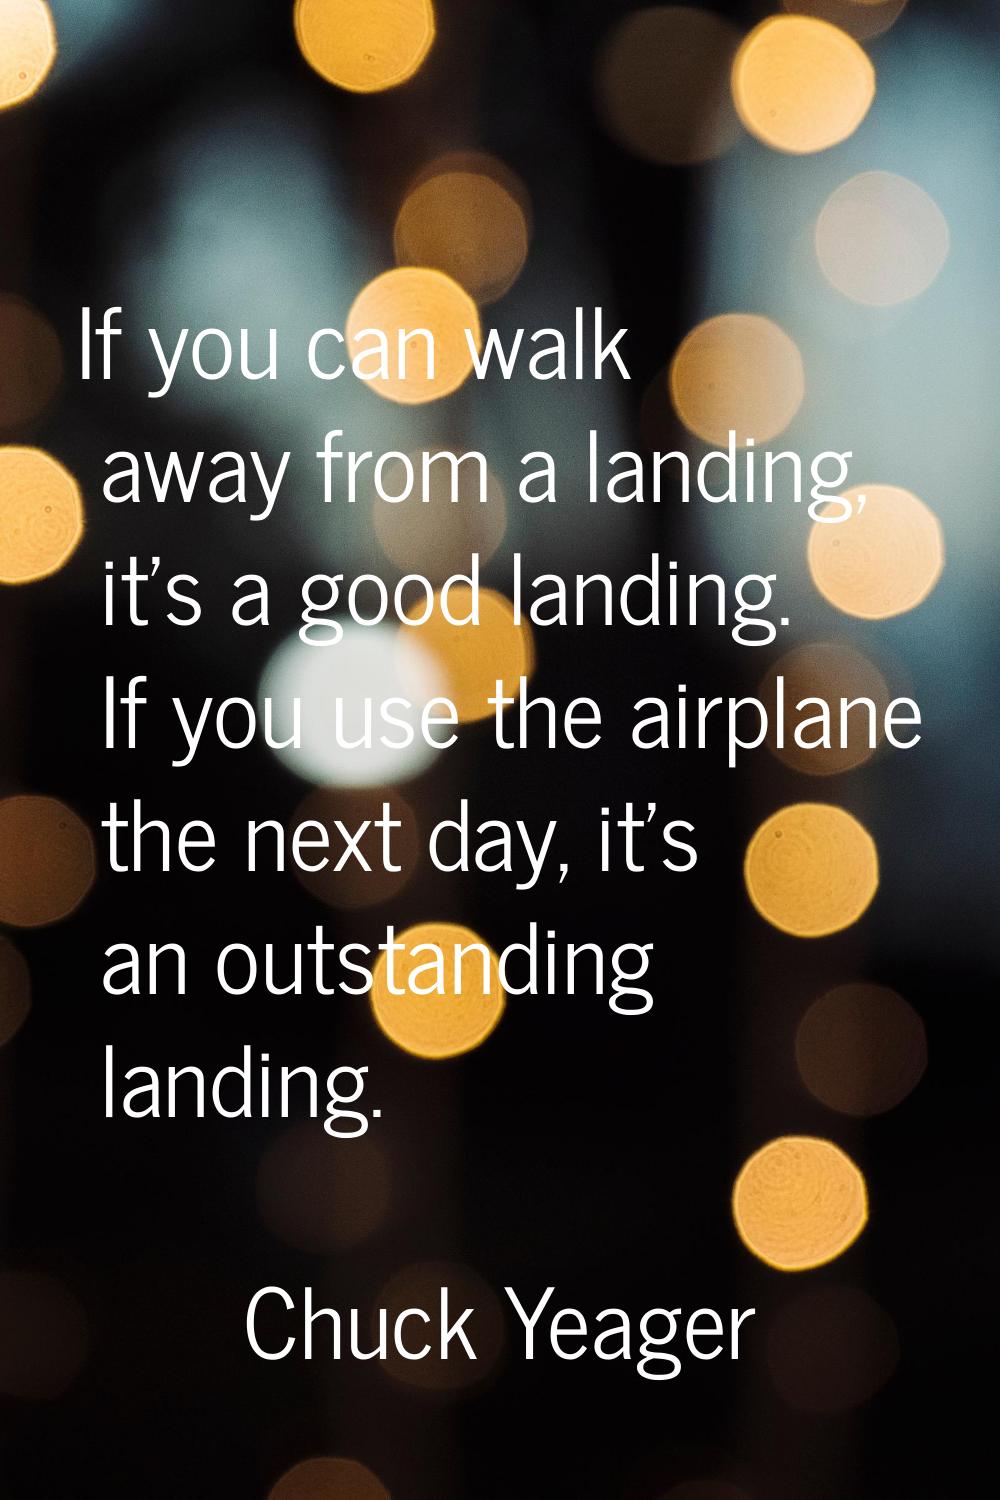 If you can walk away from a landing, it's a good landing. If you use the airplane the next day, it'